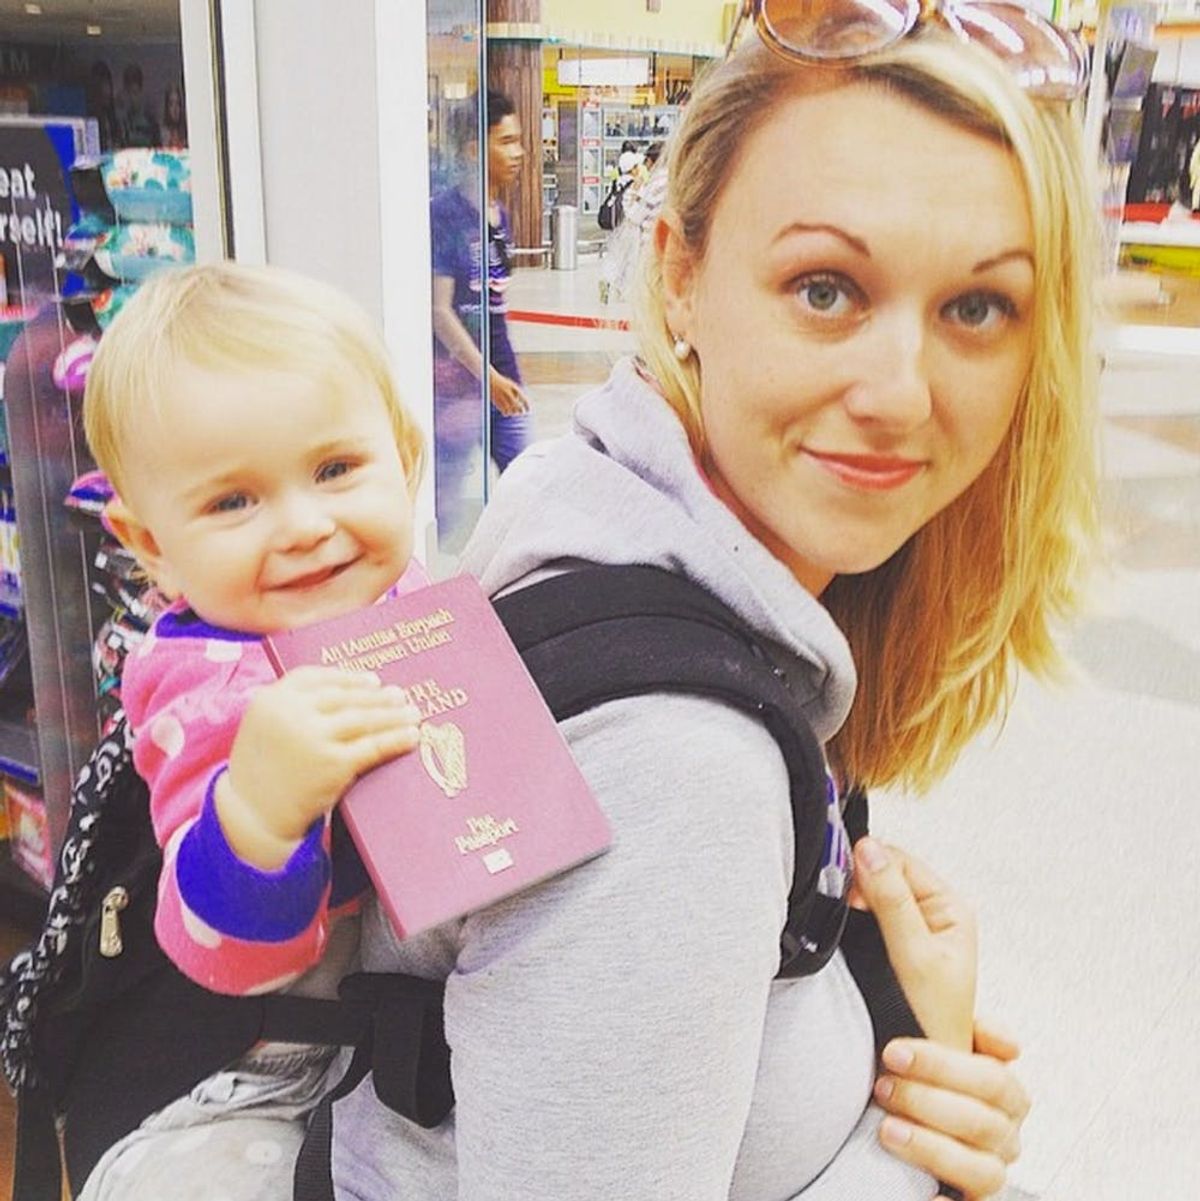 This Mom Used Her Maternity Leave to Travel the World With Her Newborn